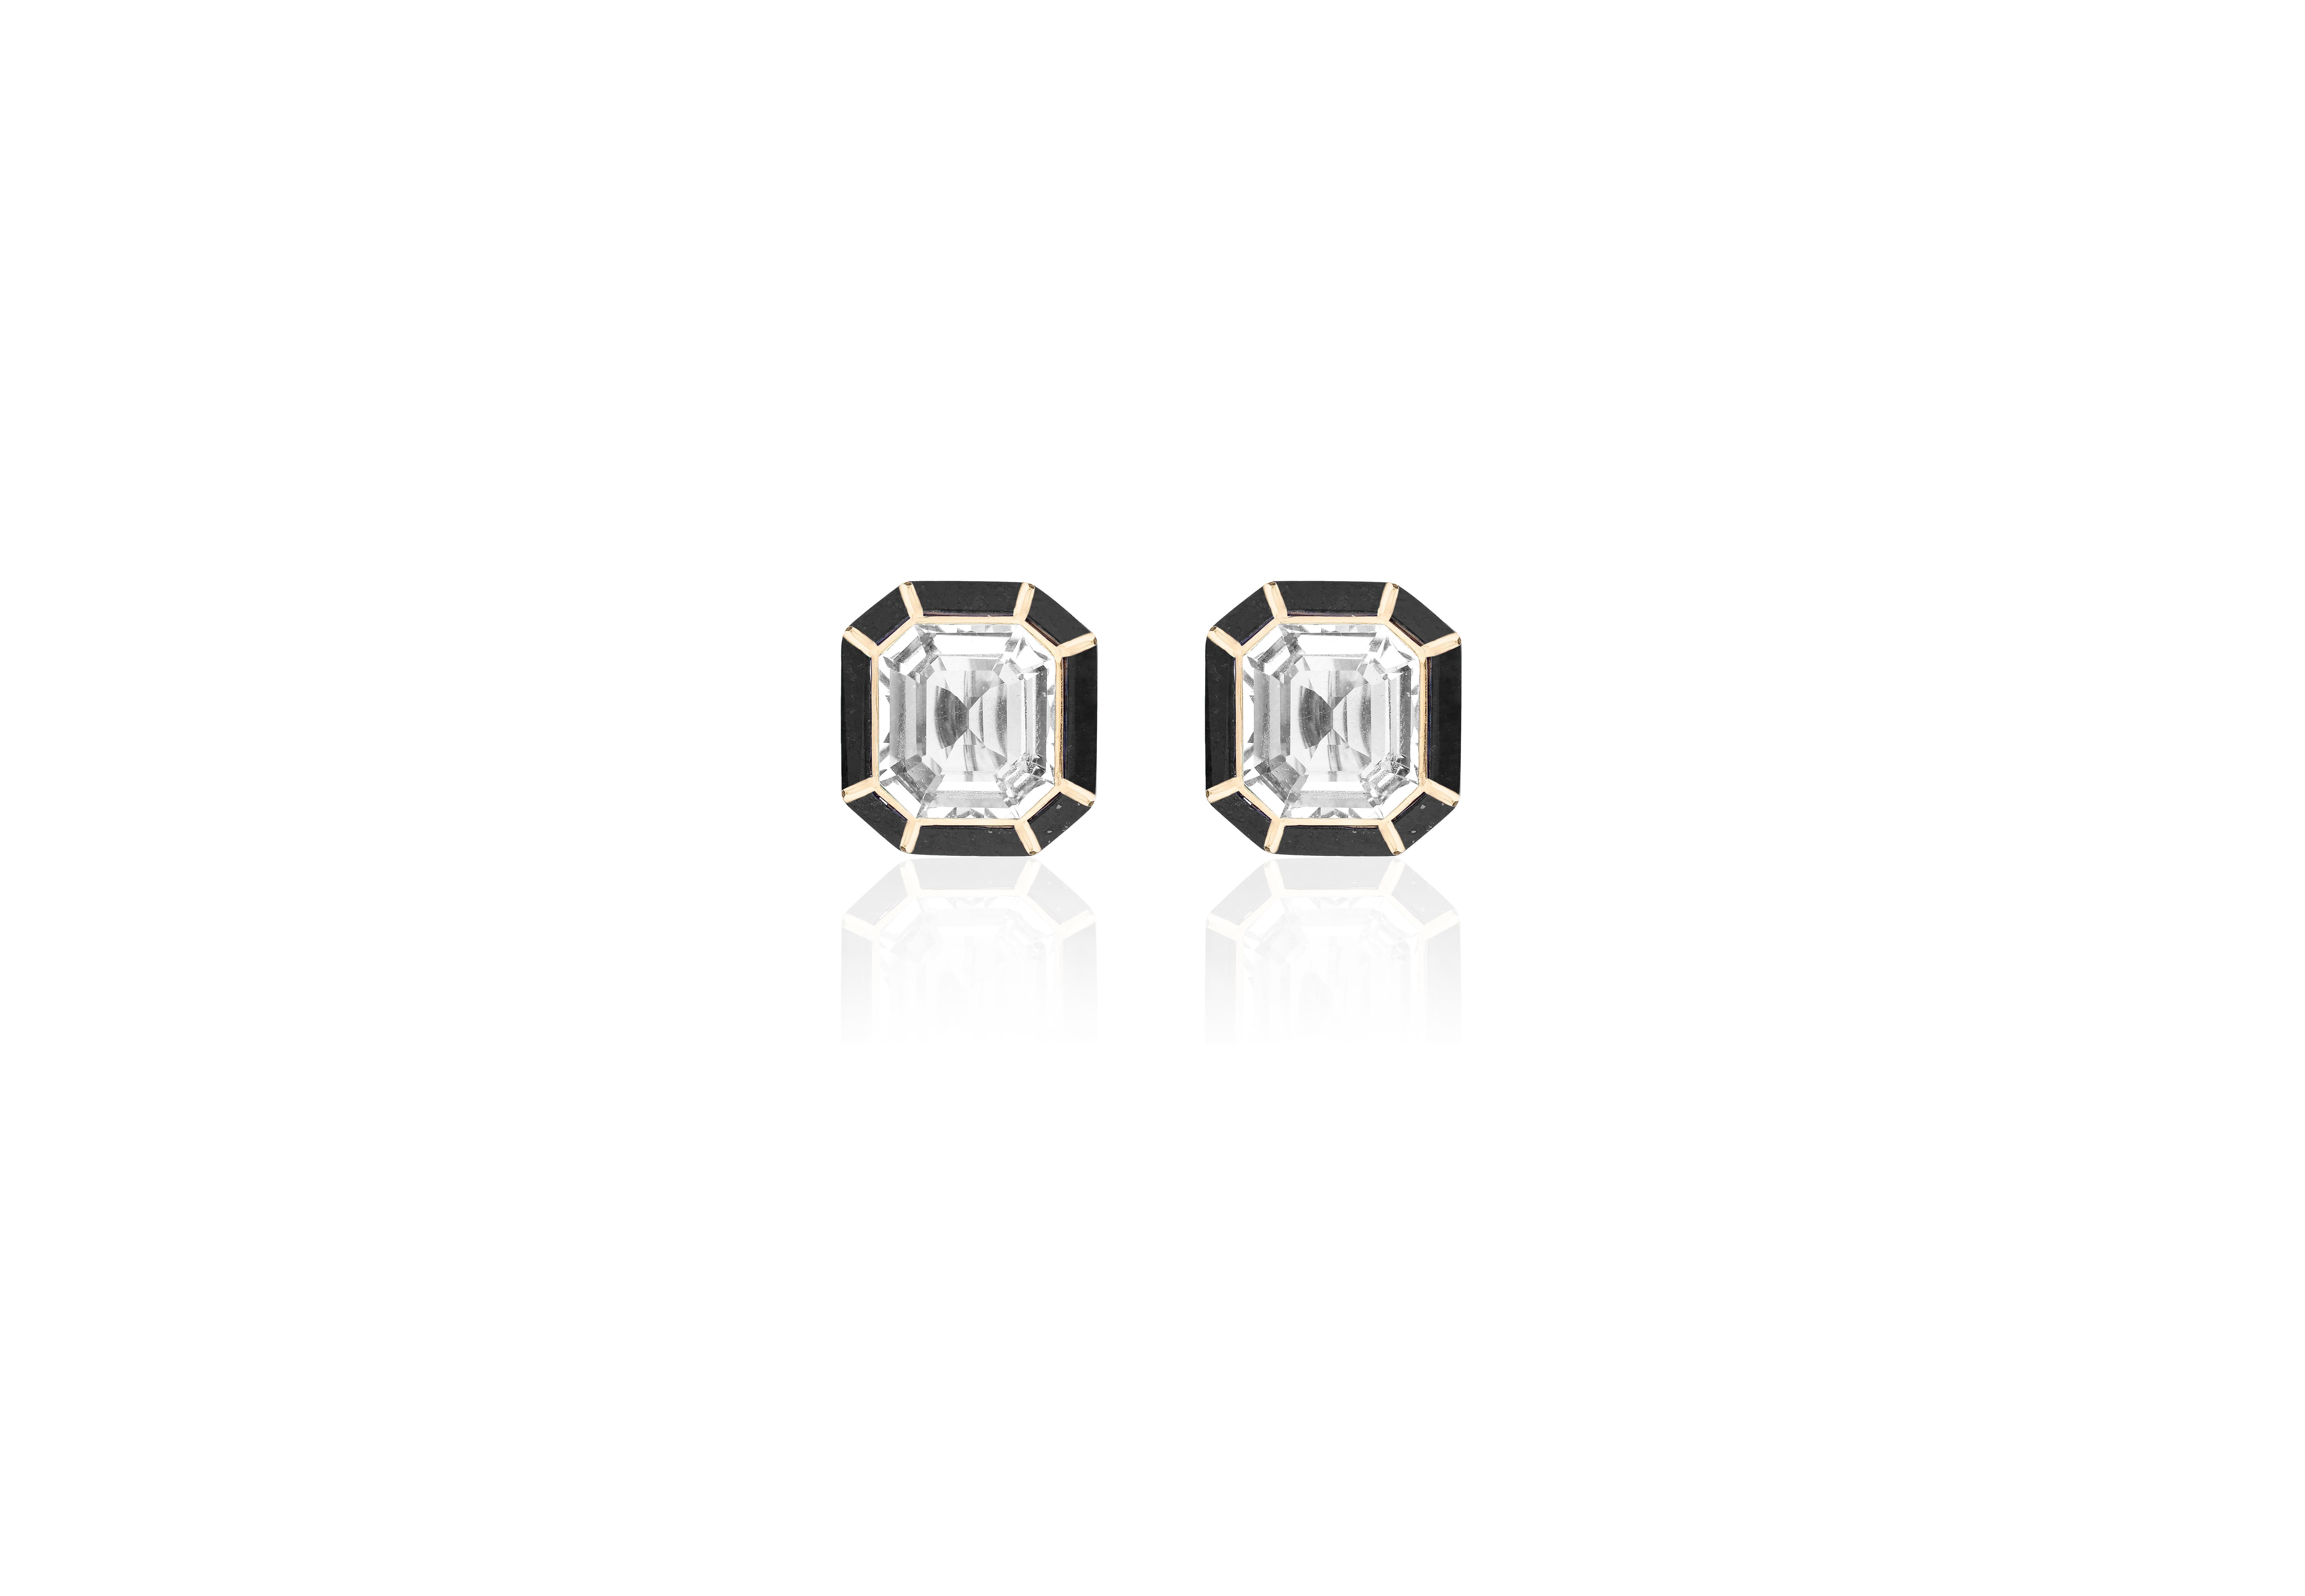 The Rock Crystal & Onyx Stud Earrings from the 'Melange' Collection showcase a captivating blend of elegance and charm. Crafted with exquisite attention to detail, these earrings feature stunning emerald cut Rock Crystal and Onyx gemstones set in